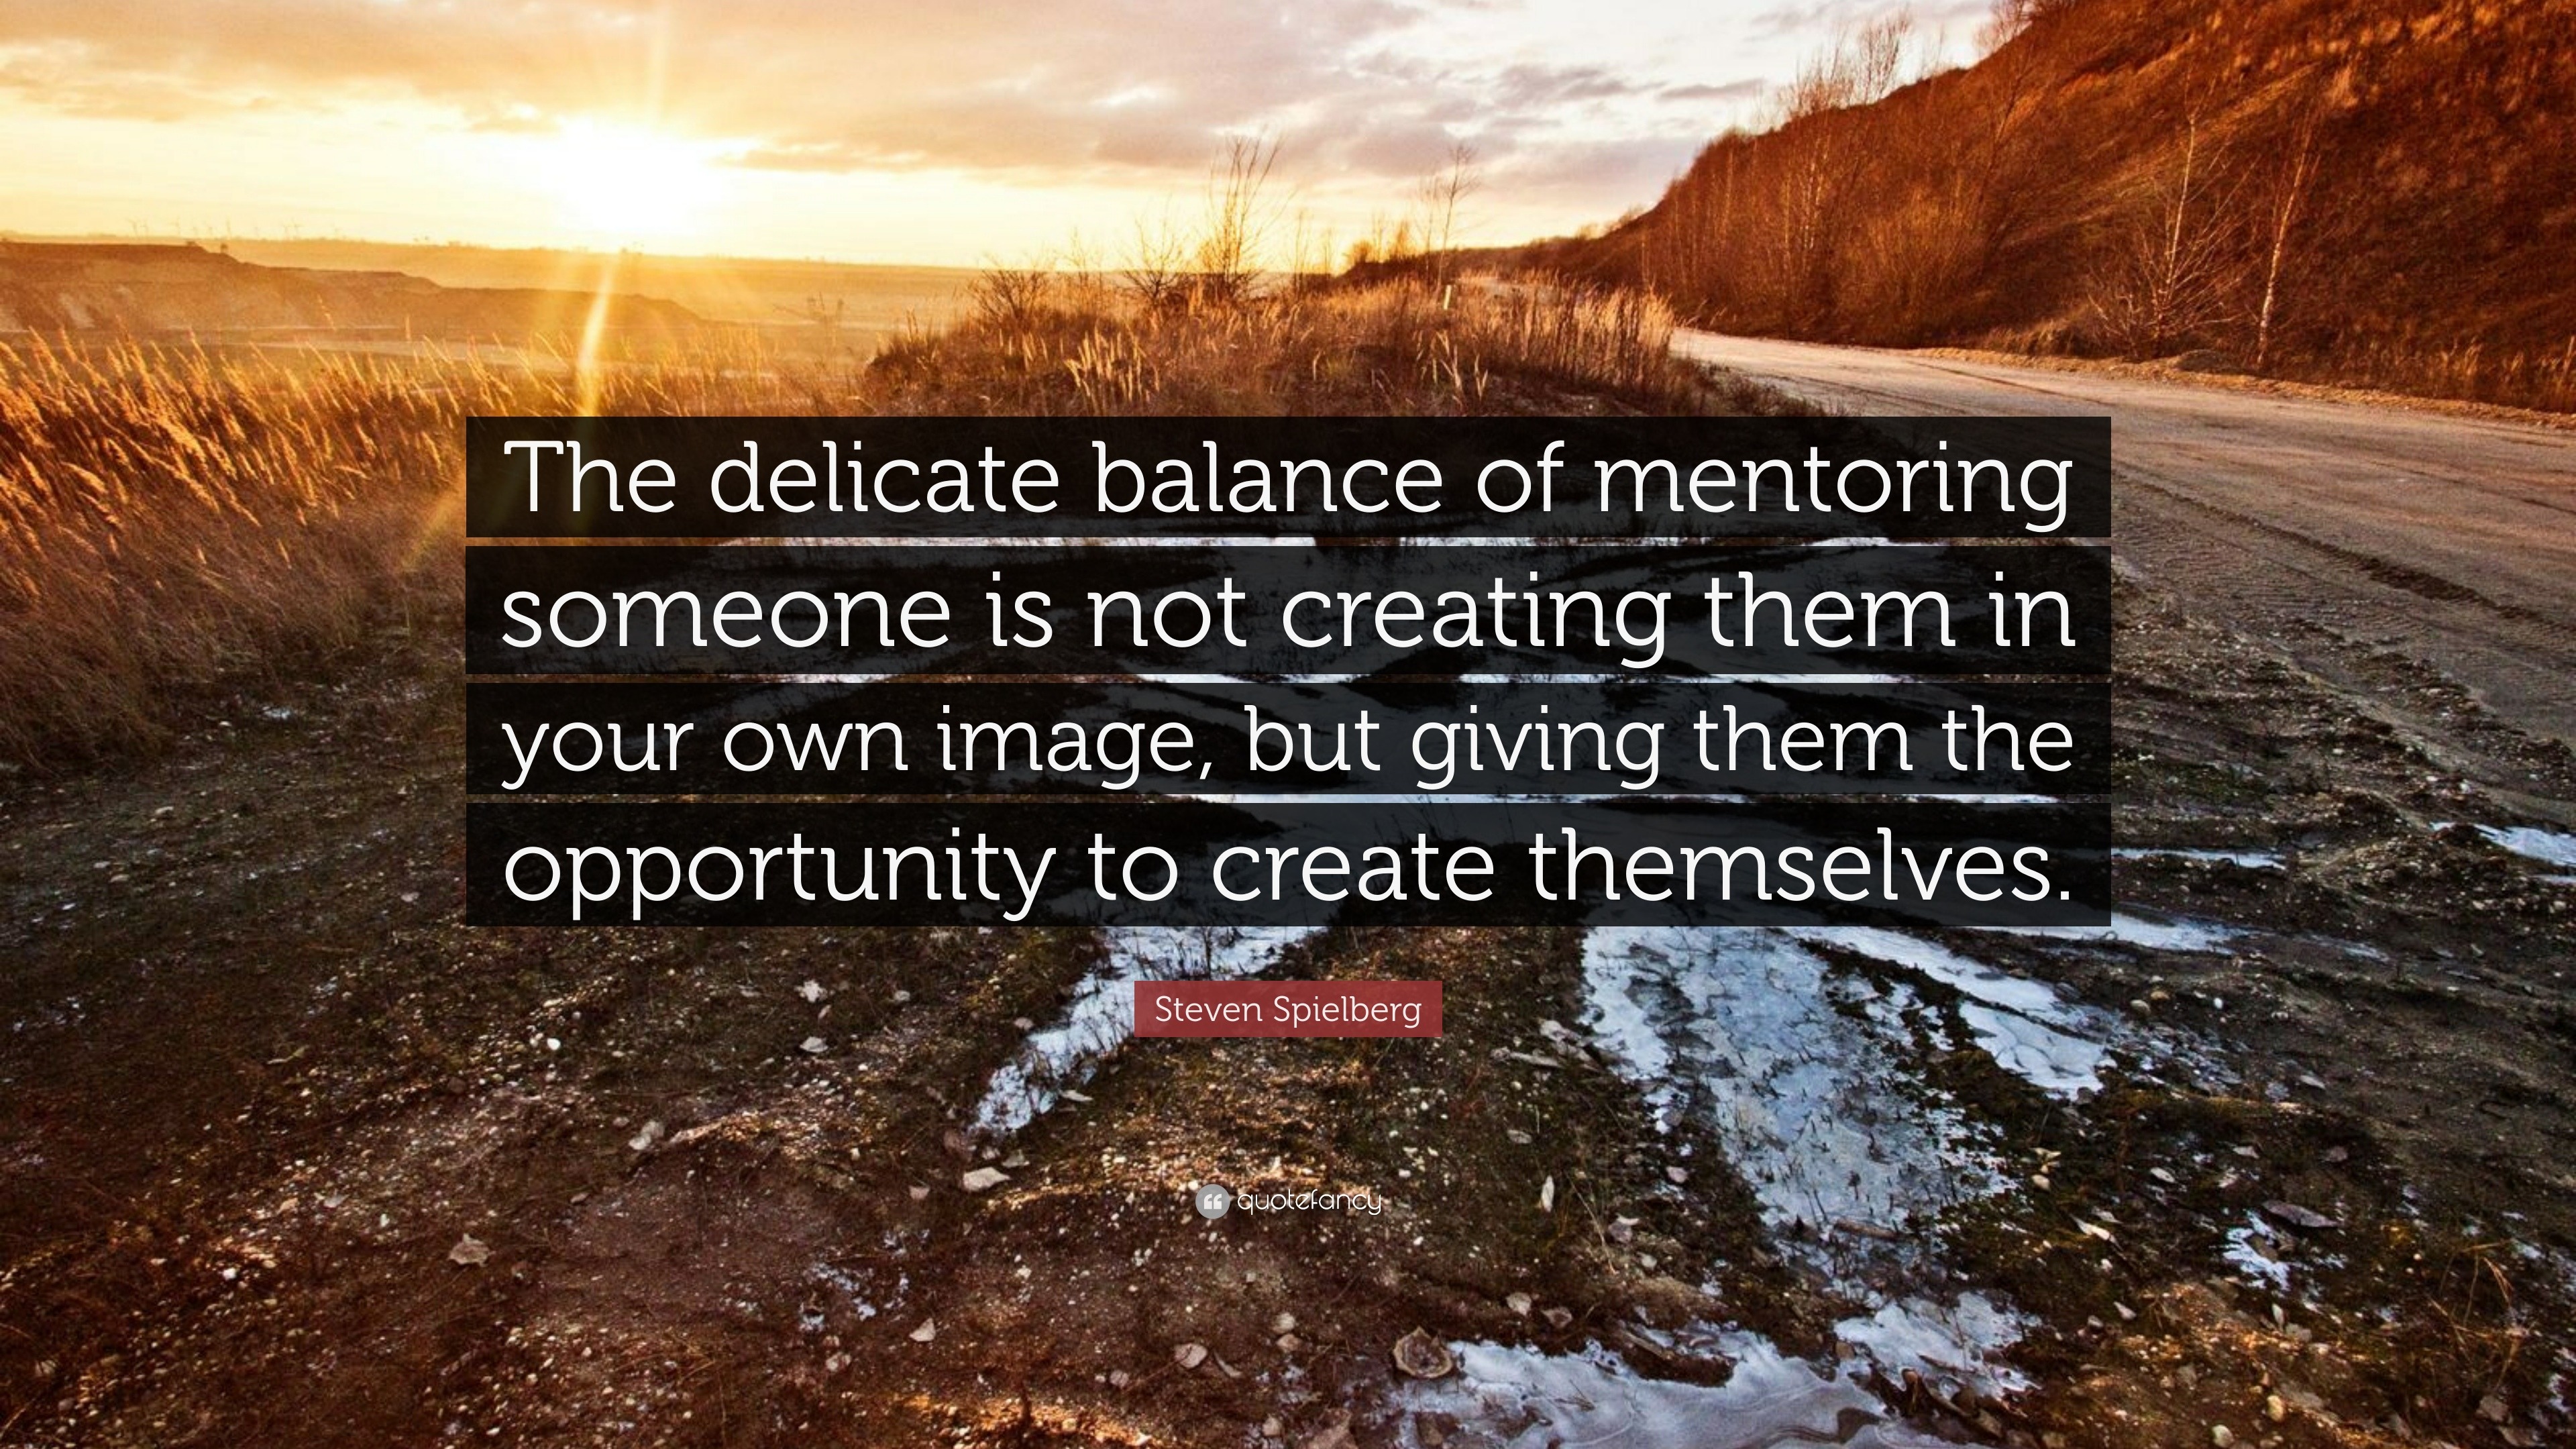 Steven Spielberg Quote “The delicate balance of mentoring